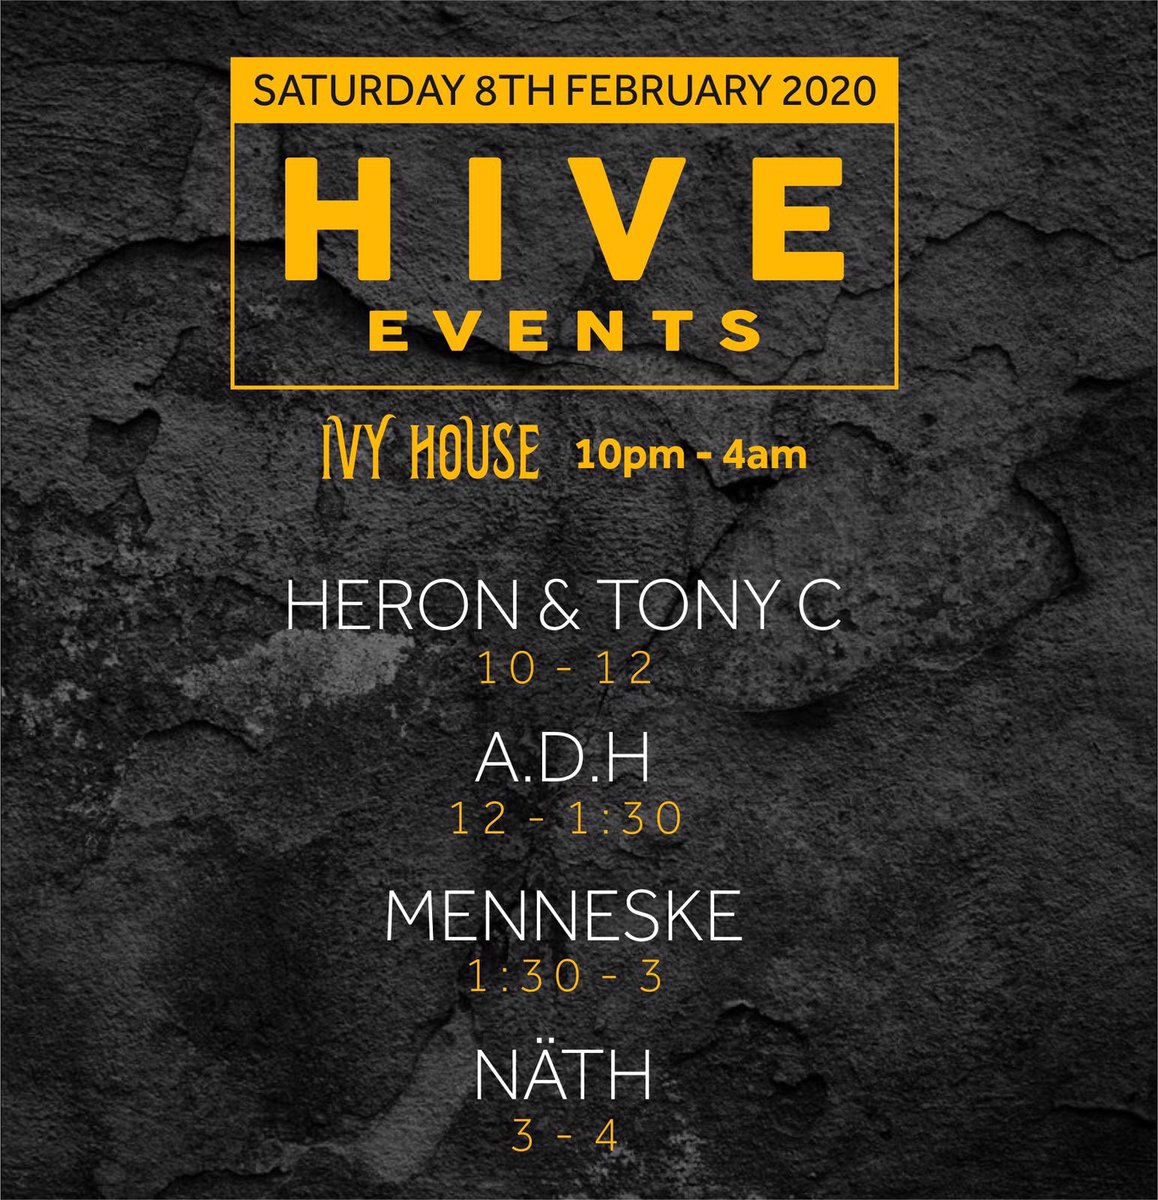 Buzzing for tonight, arrived in Cov ahead of a 2 hour opening set for @HiveEvents_ 💥